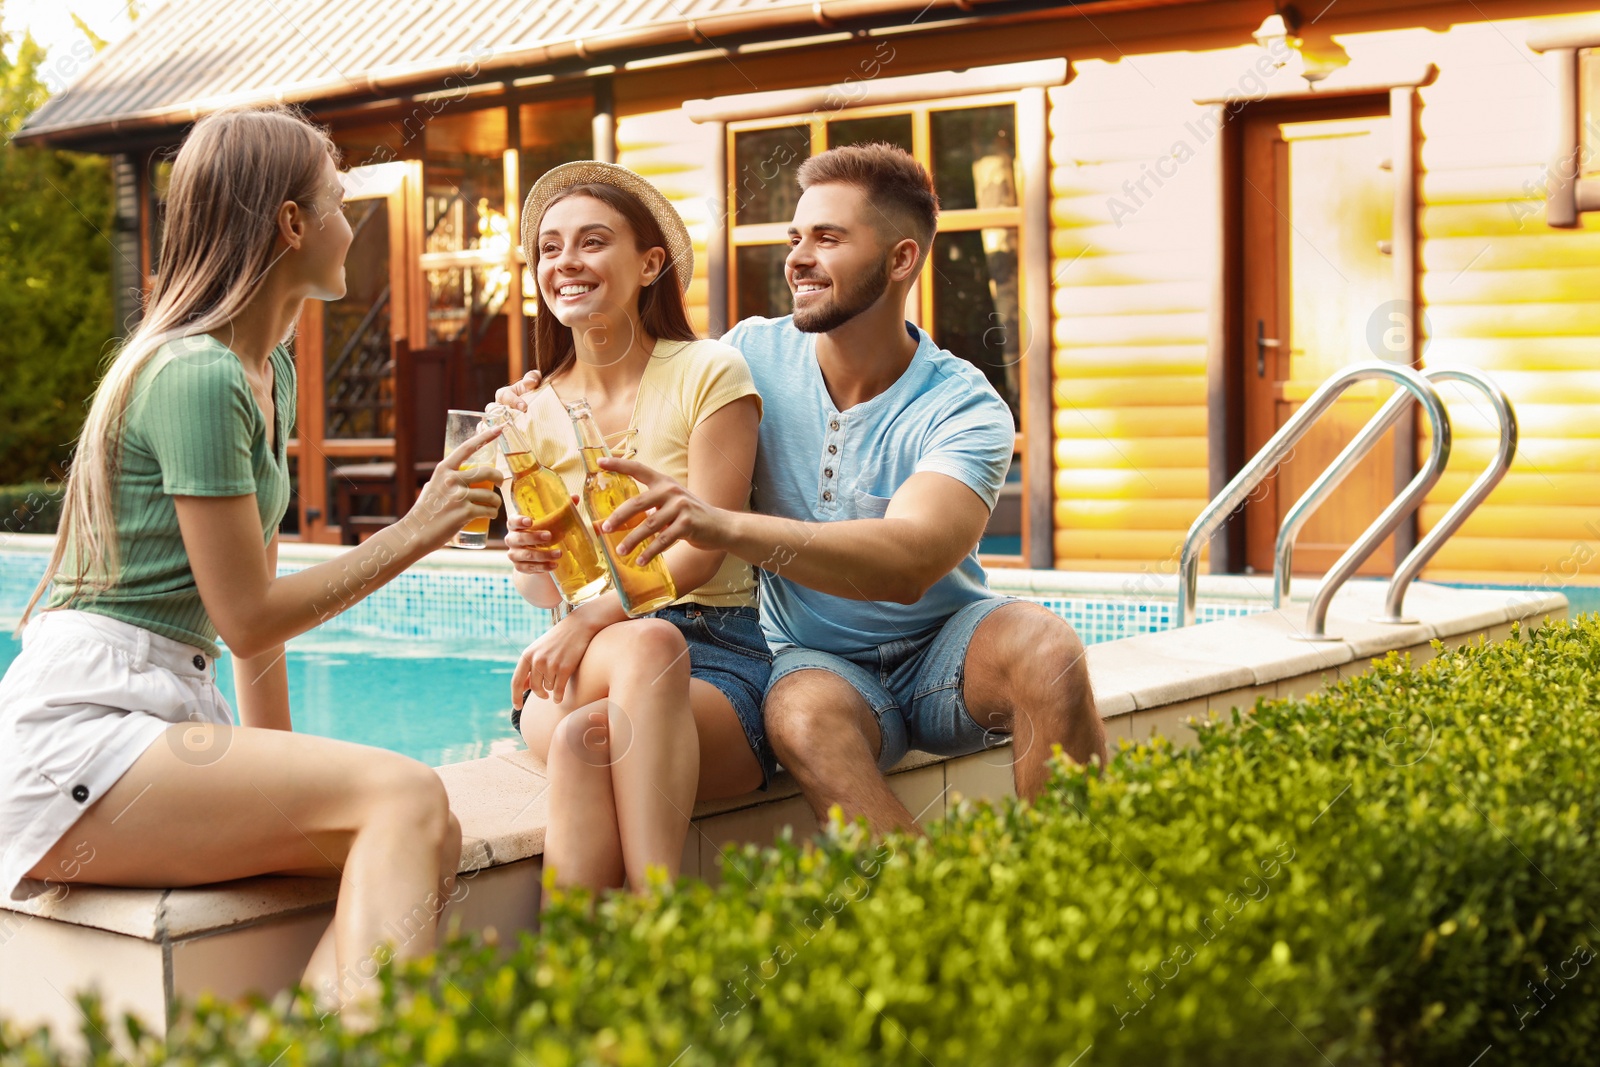 Photo of Happy friends with drinks at barbecue party near swimming pool outdoors